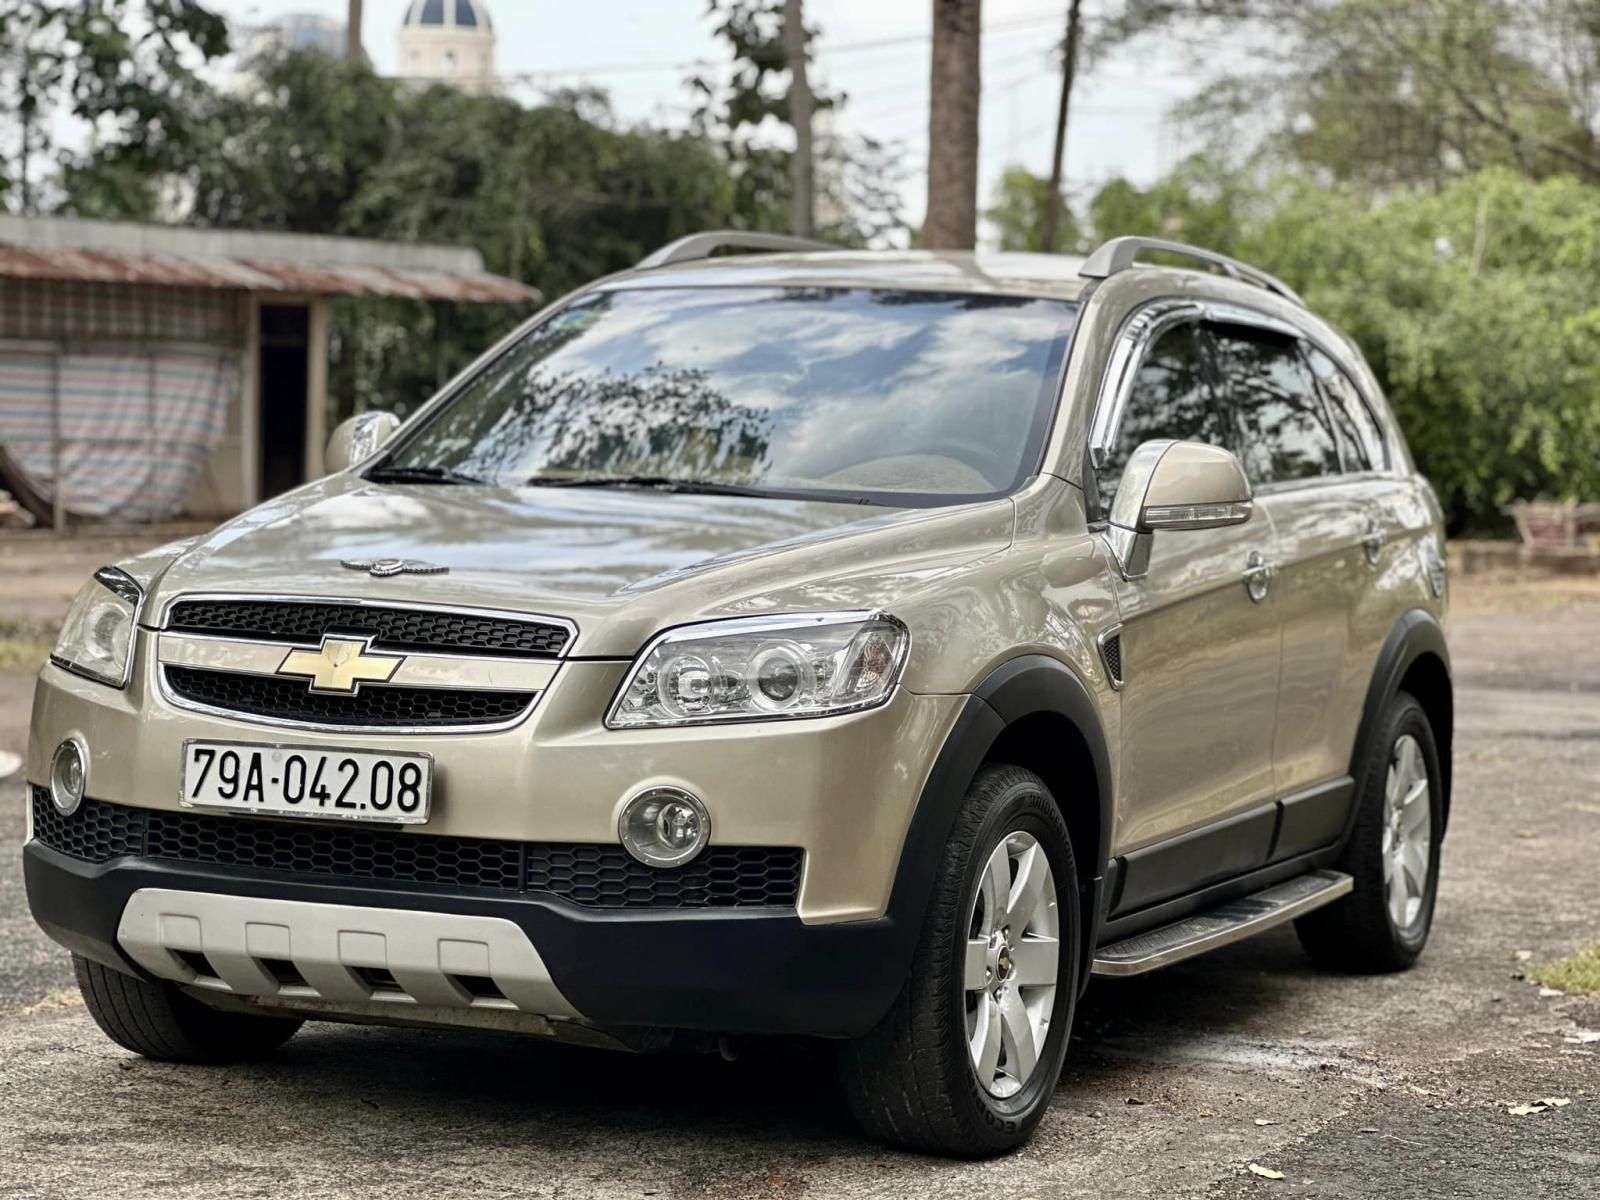 Chevrolet Captiva Info Details Specs Pictures Wiki  GM Authority